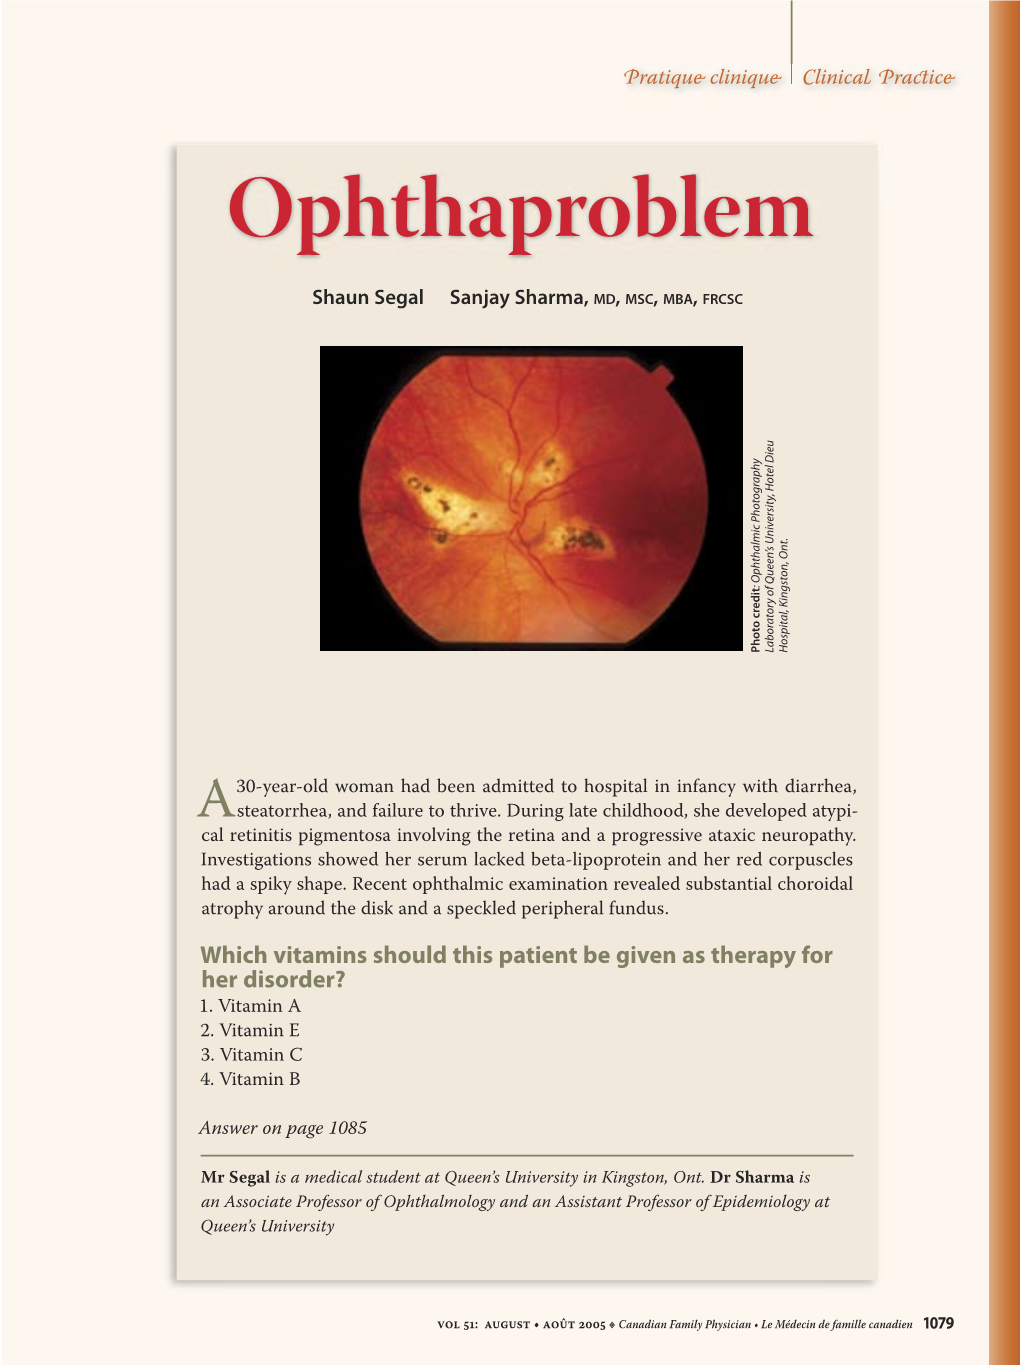 Ophthaproblem